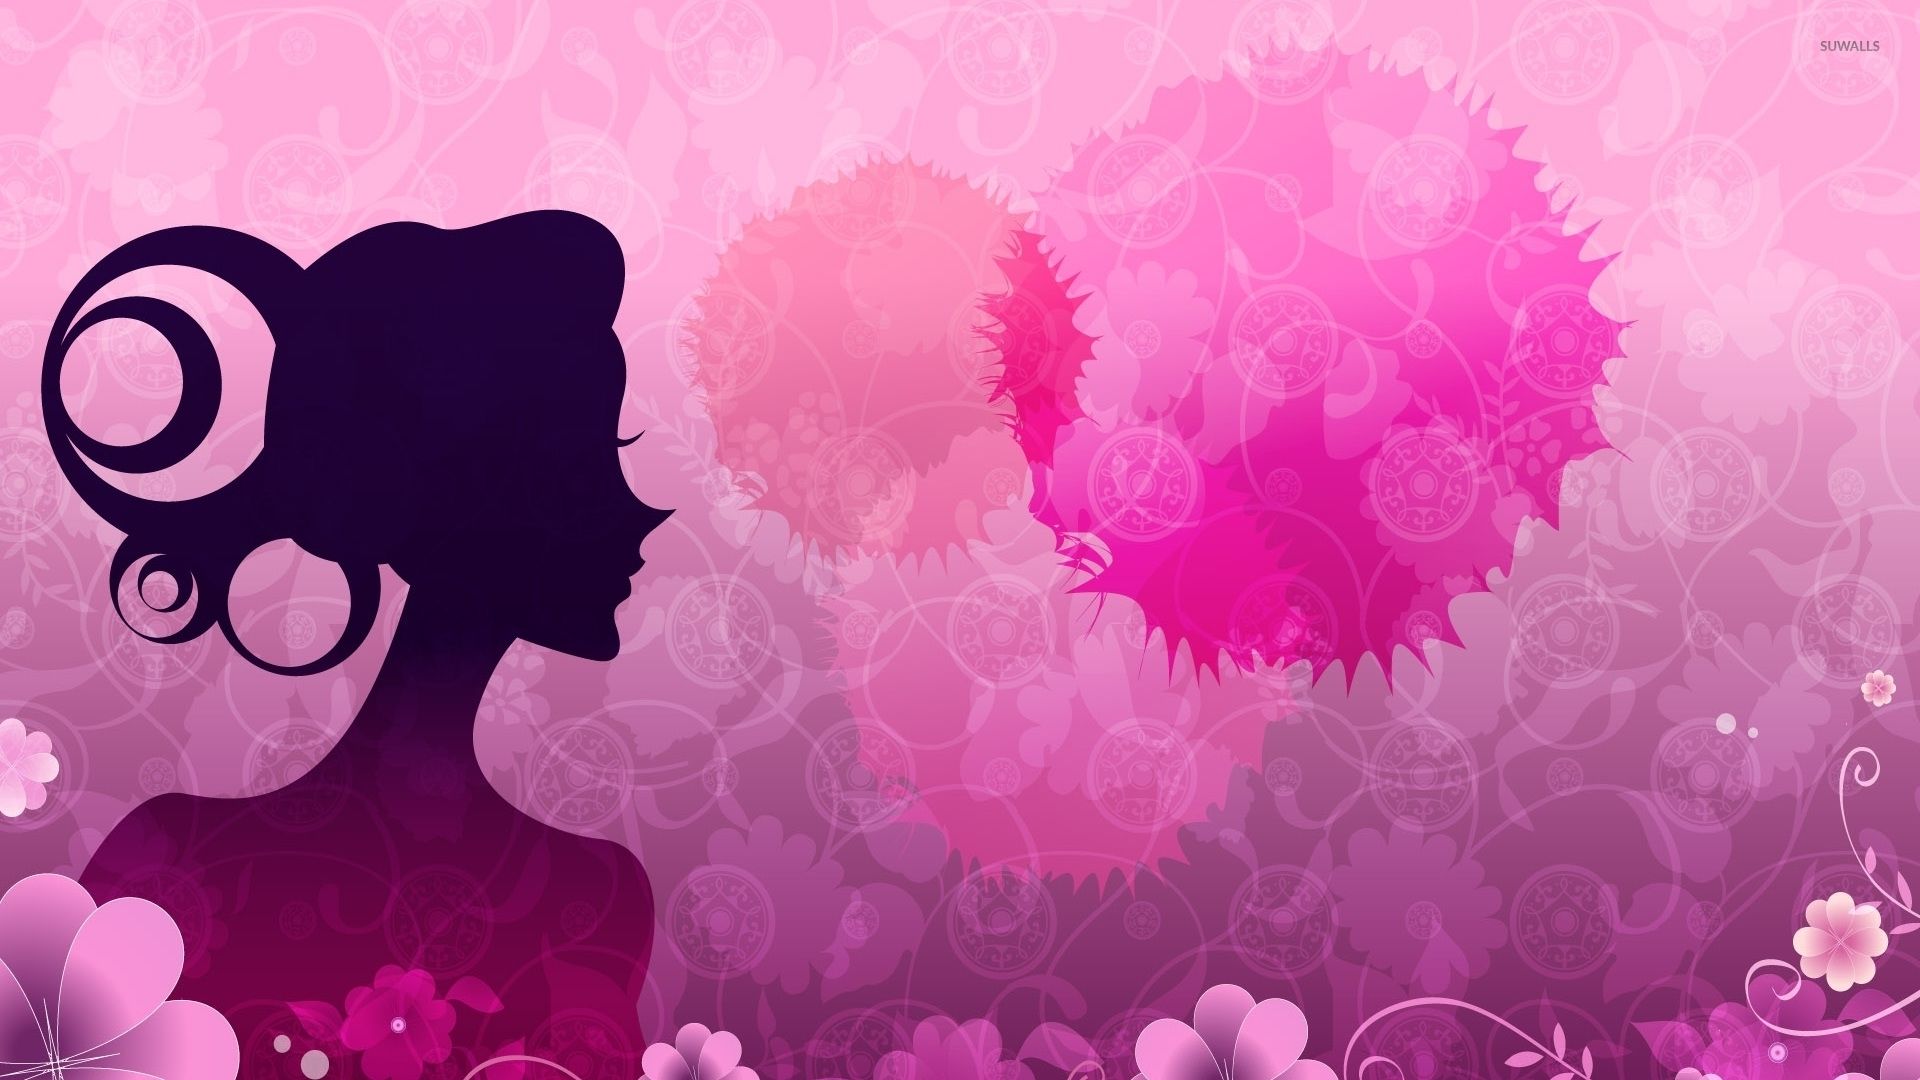 1920x1080 Woman Silhouette By The Pink Flowers Wallpaper Vector Wallpaper